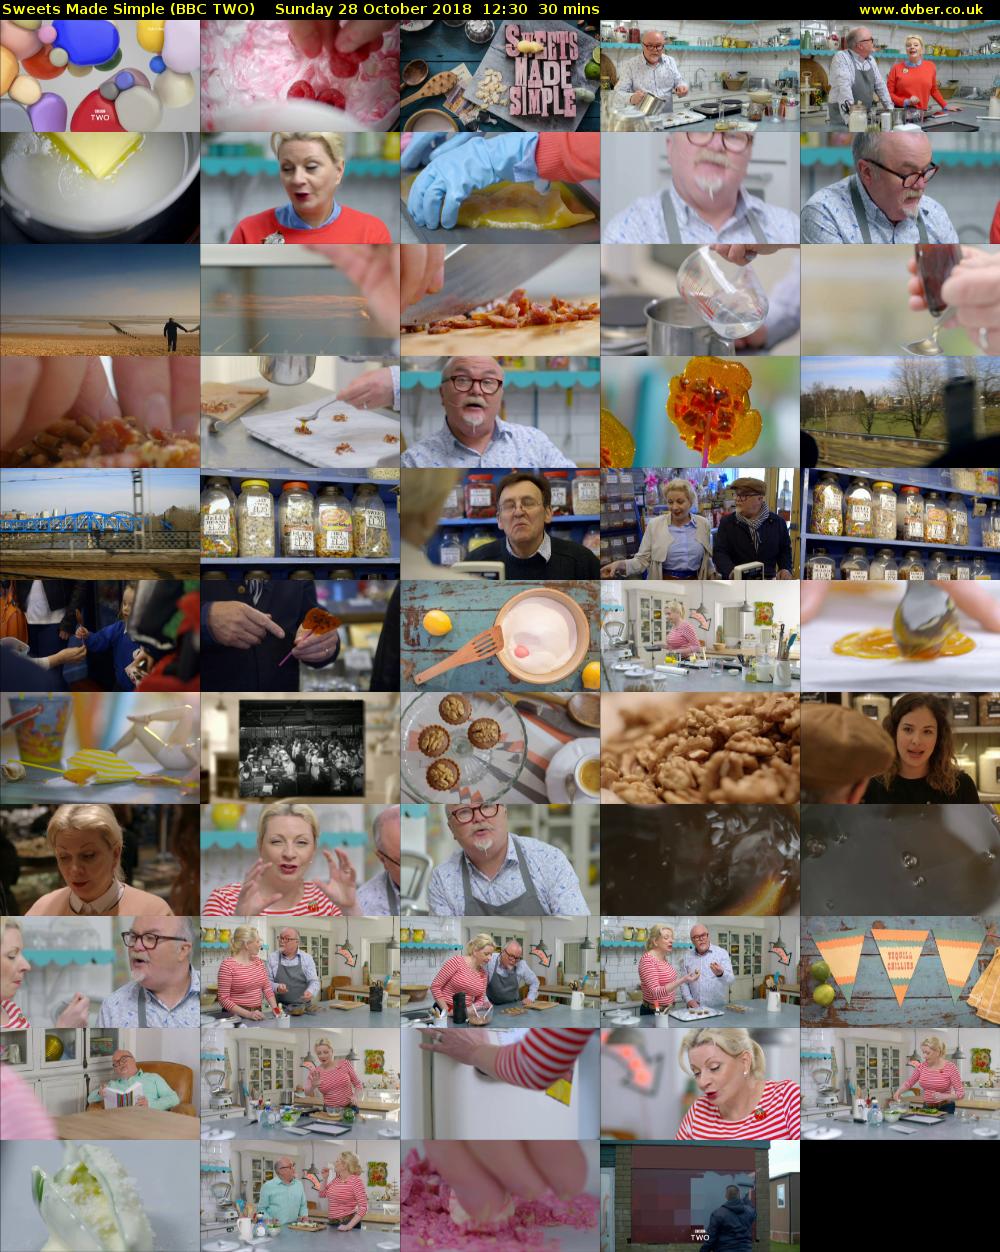 Sweets Made Simple (BBC TWO) Sunday 28 October 2018 12:30 - 13:00